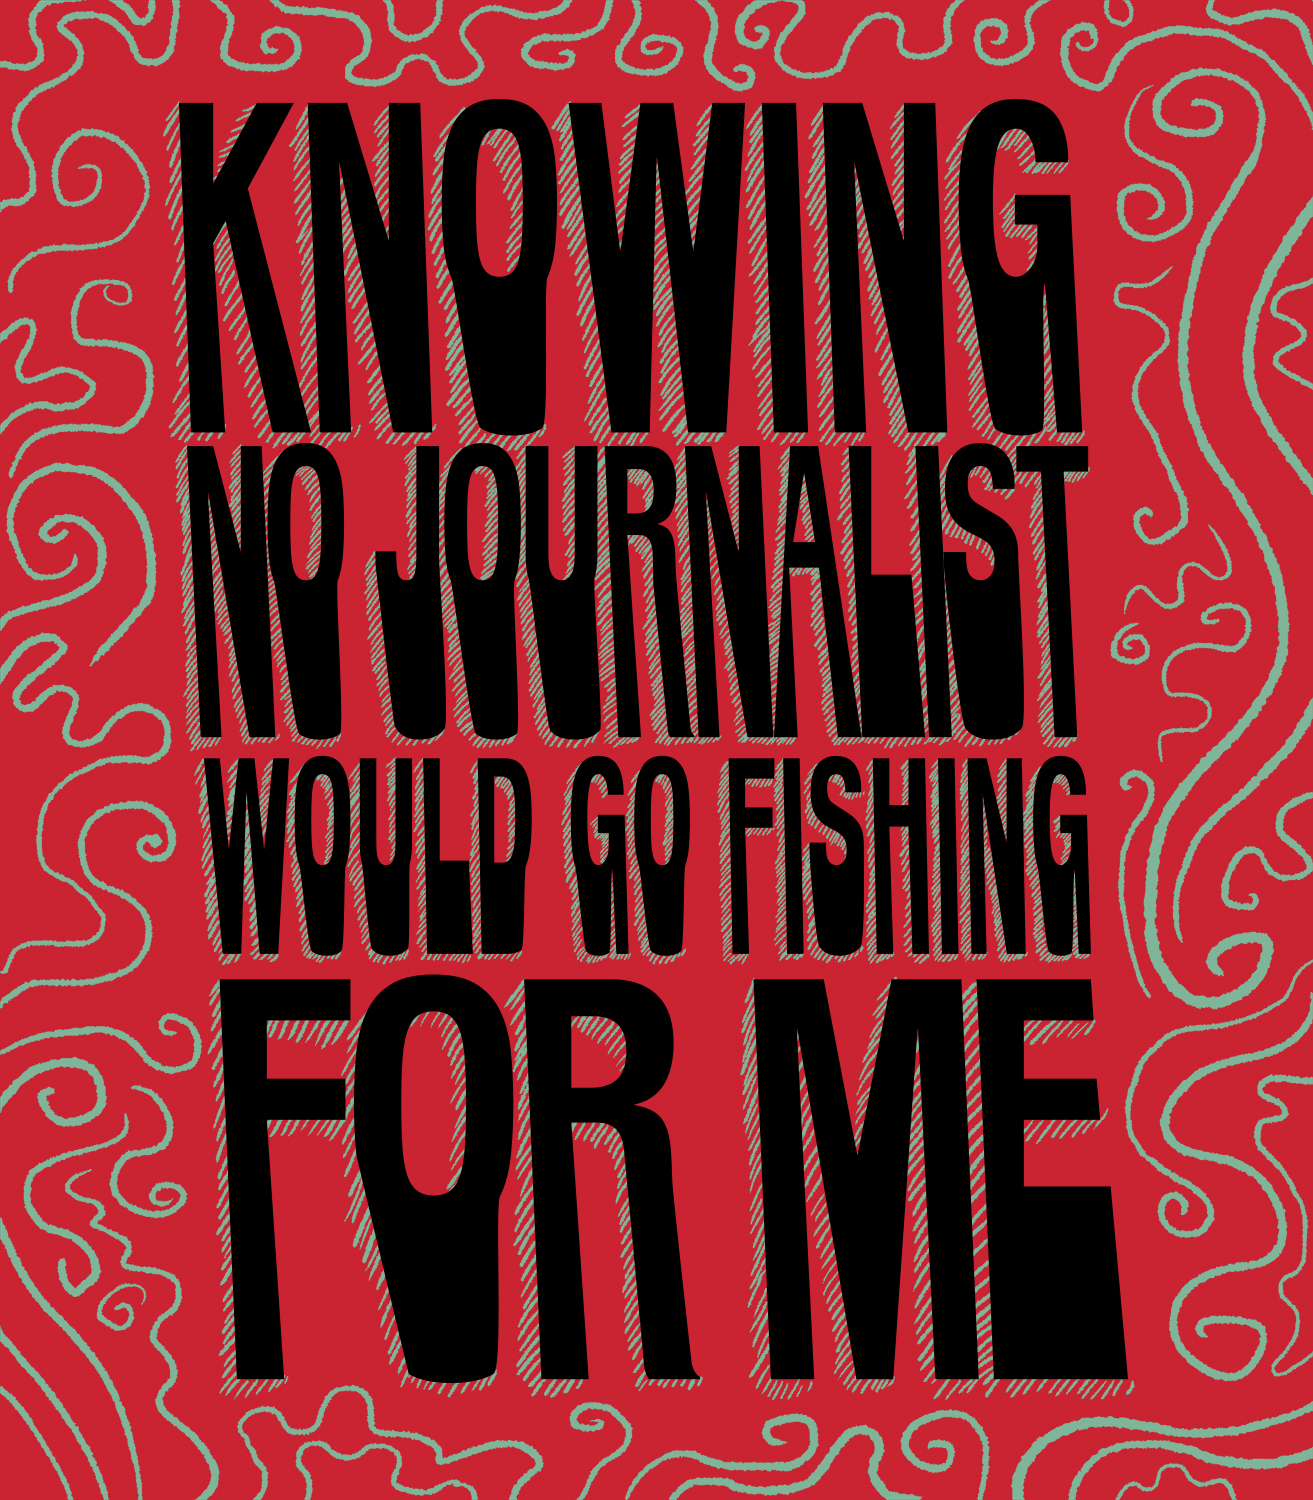 Thin aquamarine swirls against a bright red background surrounding big 3-Dimensional block letters jutting from the picture.